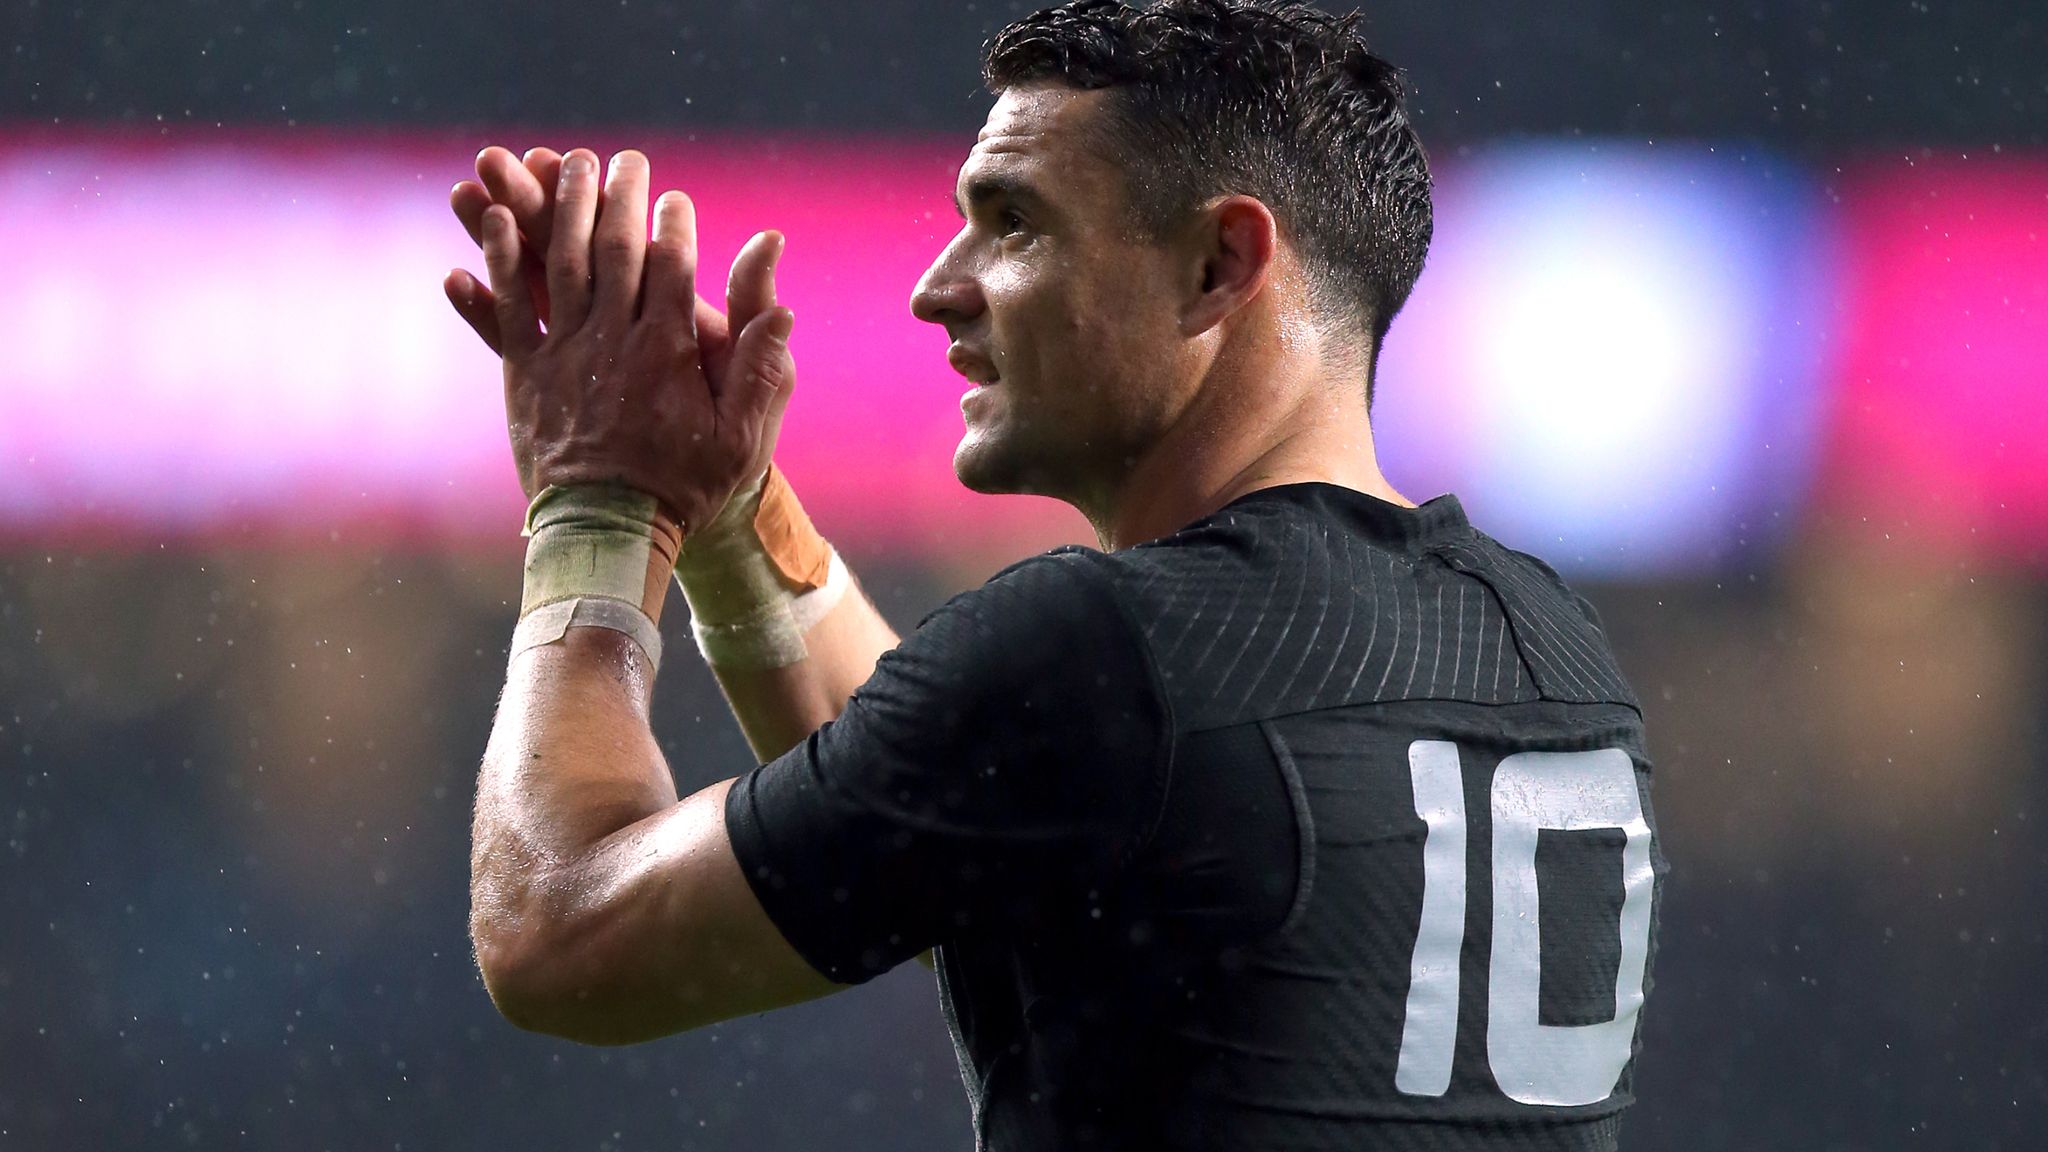 All Blacks - Tough life! Dan Carter and wife Honor getting ready